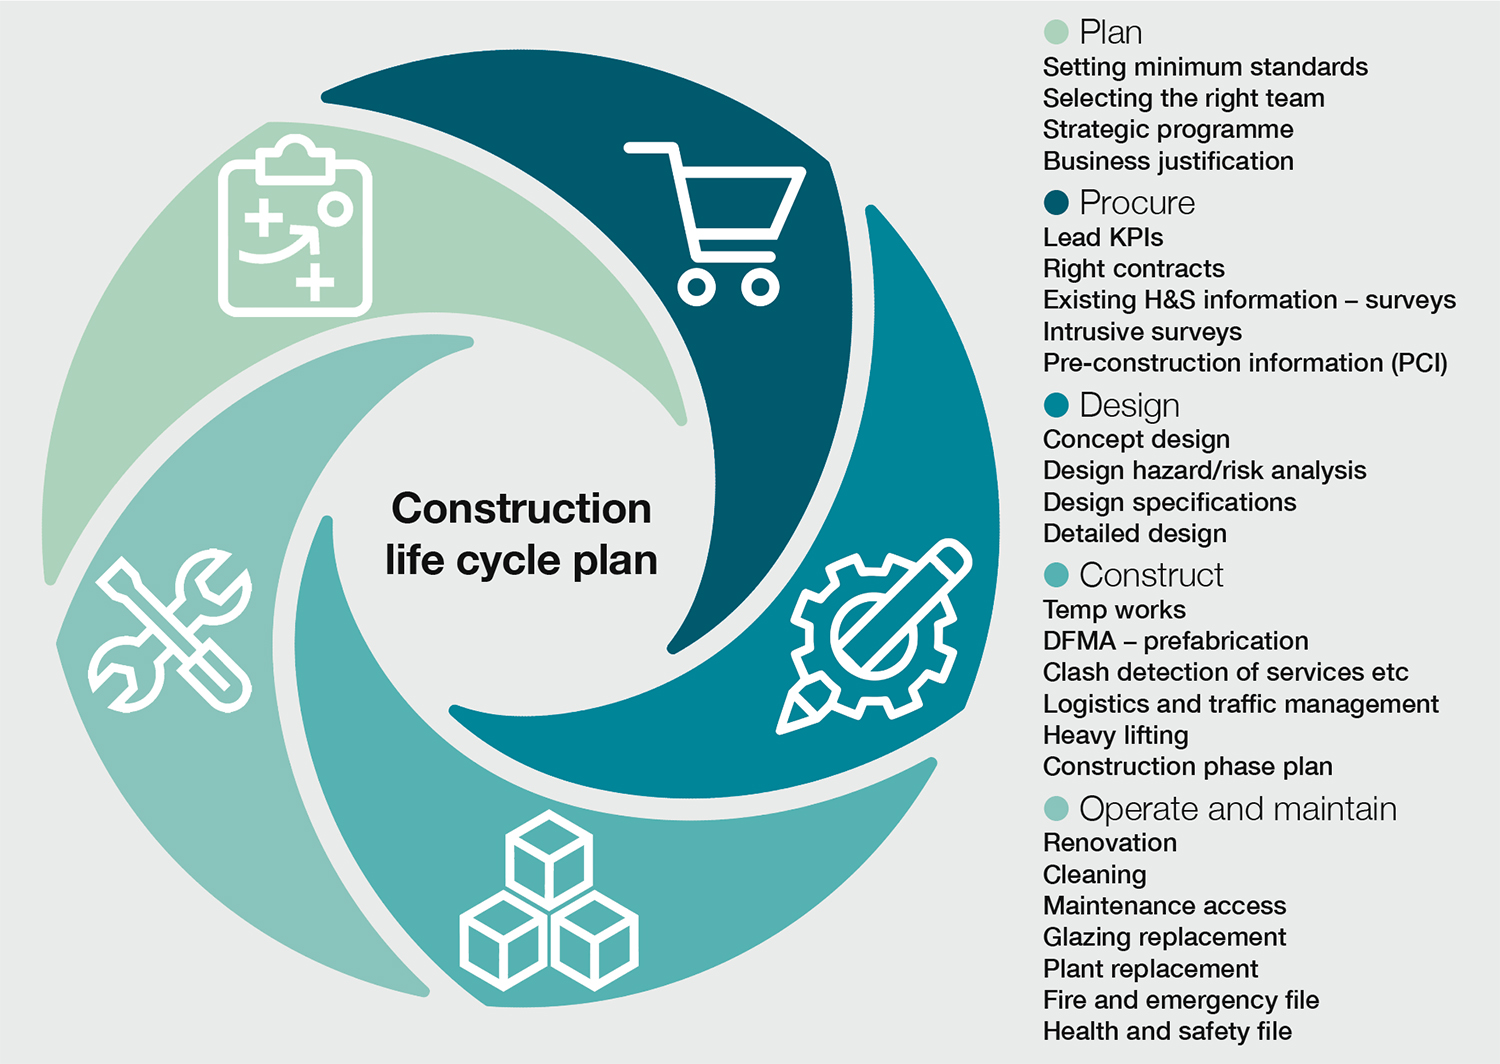 Construction life cycle plan